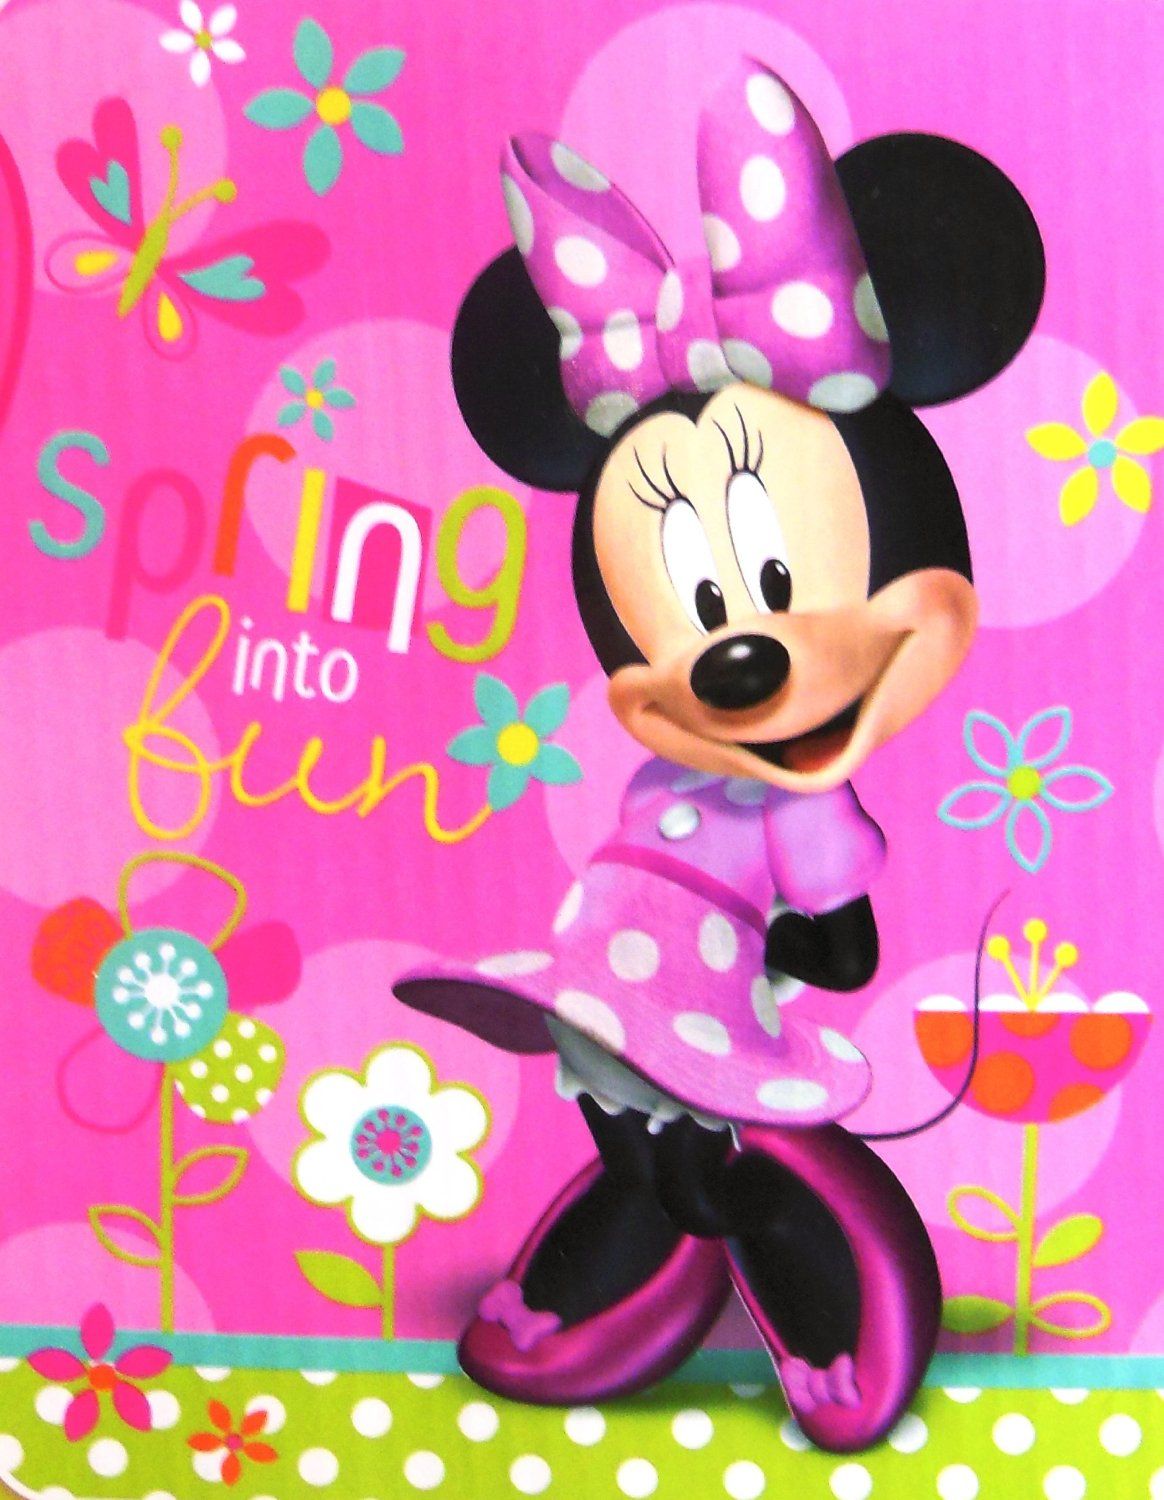 Minnie Mouse Room Decorating Ideas Image Wallpaper for Desktop ...